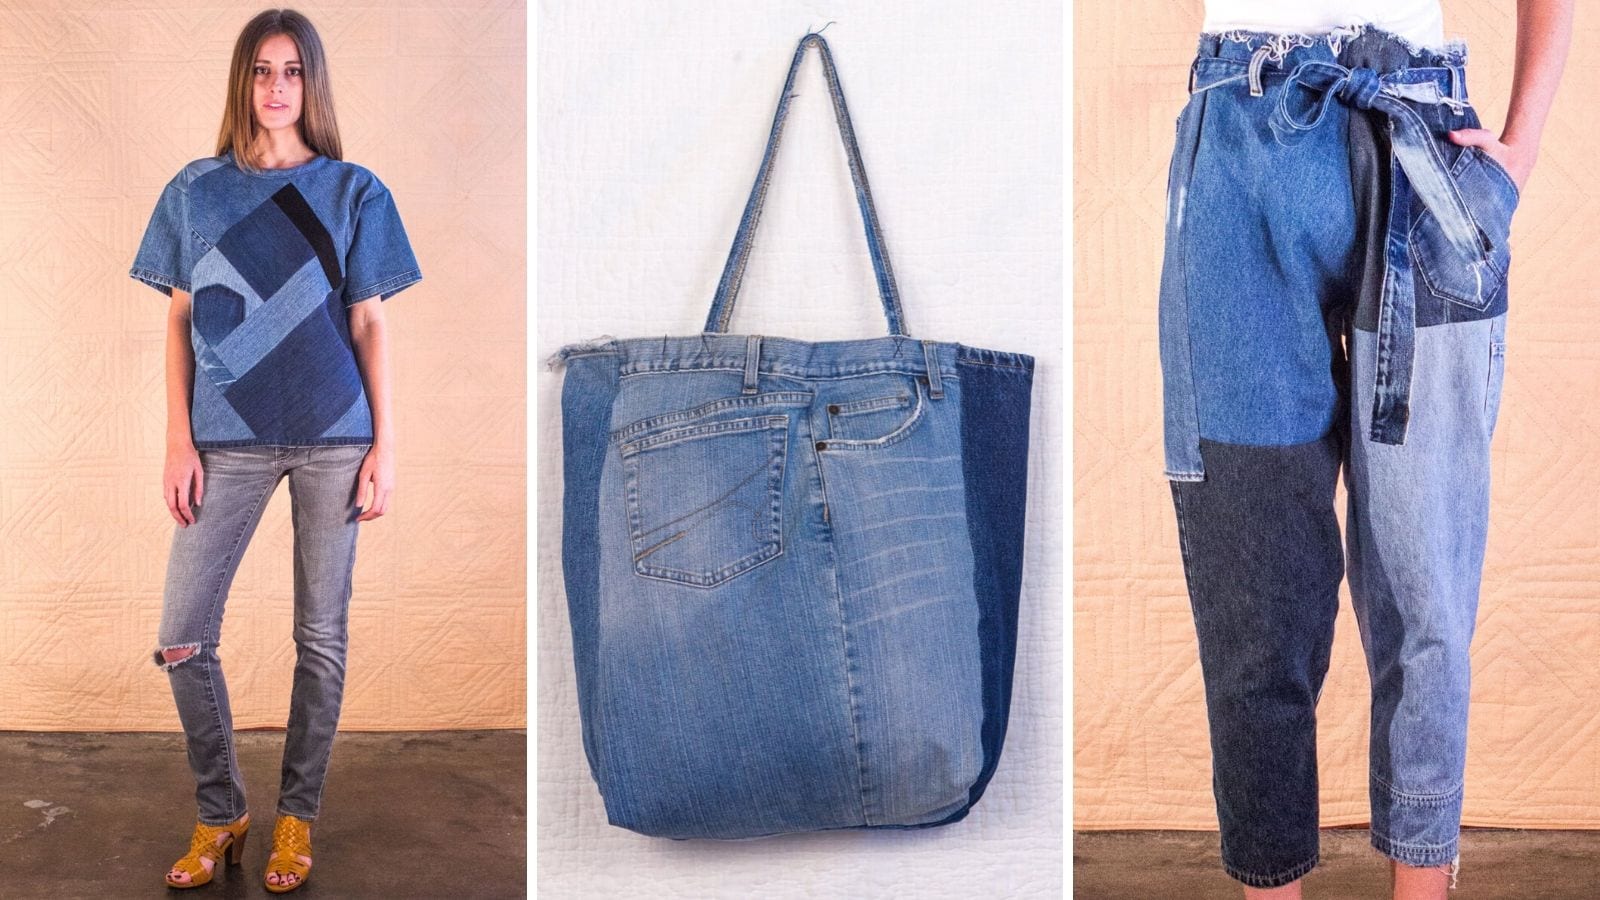 Denim Bag of Recycled Jeans, Blue